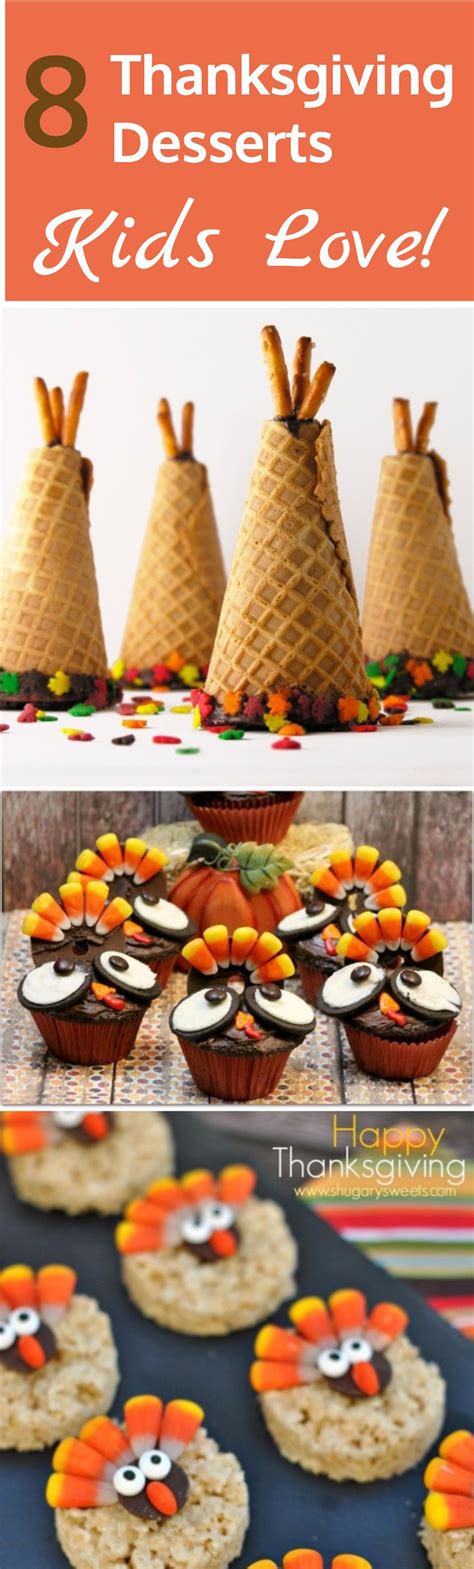 We may earn commission from links on this page, but we only recommend products we back. Thanksgiving Desserts Kids Love! | Kid desserts ...